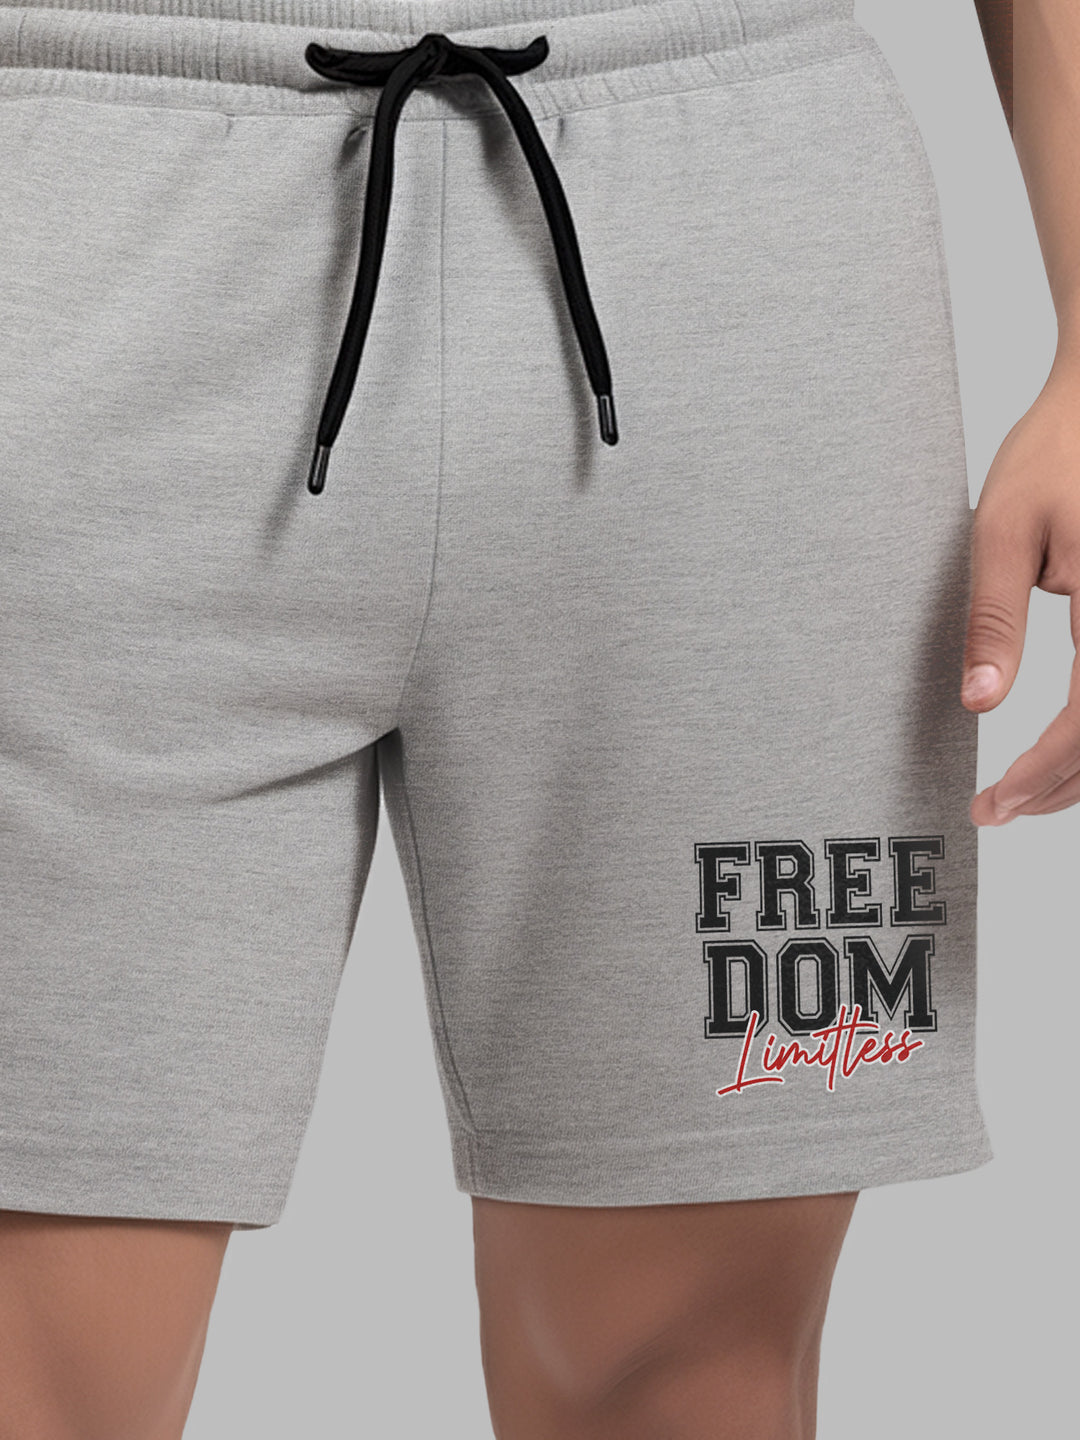 Freedom Cotton Mens T Shirt and Short Set